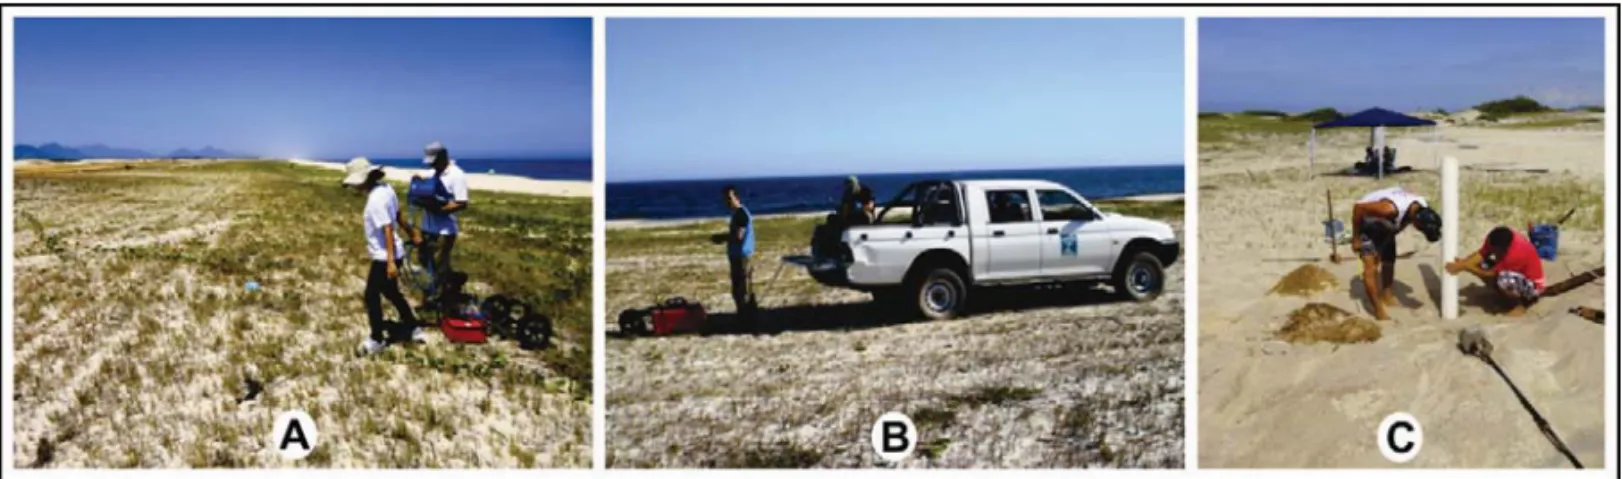 Figure 4 – Collecting GPR data: (A) 400 MHz antenna carried by hand; (B) 200 MHz antenna adapted to a vehicle; (C) Mechanical borehole.